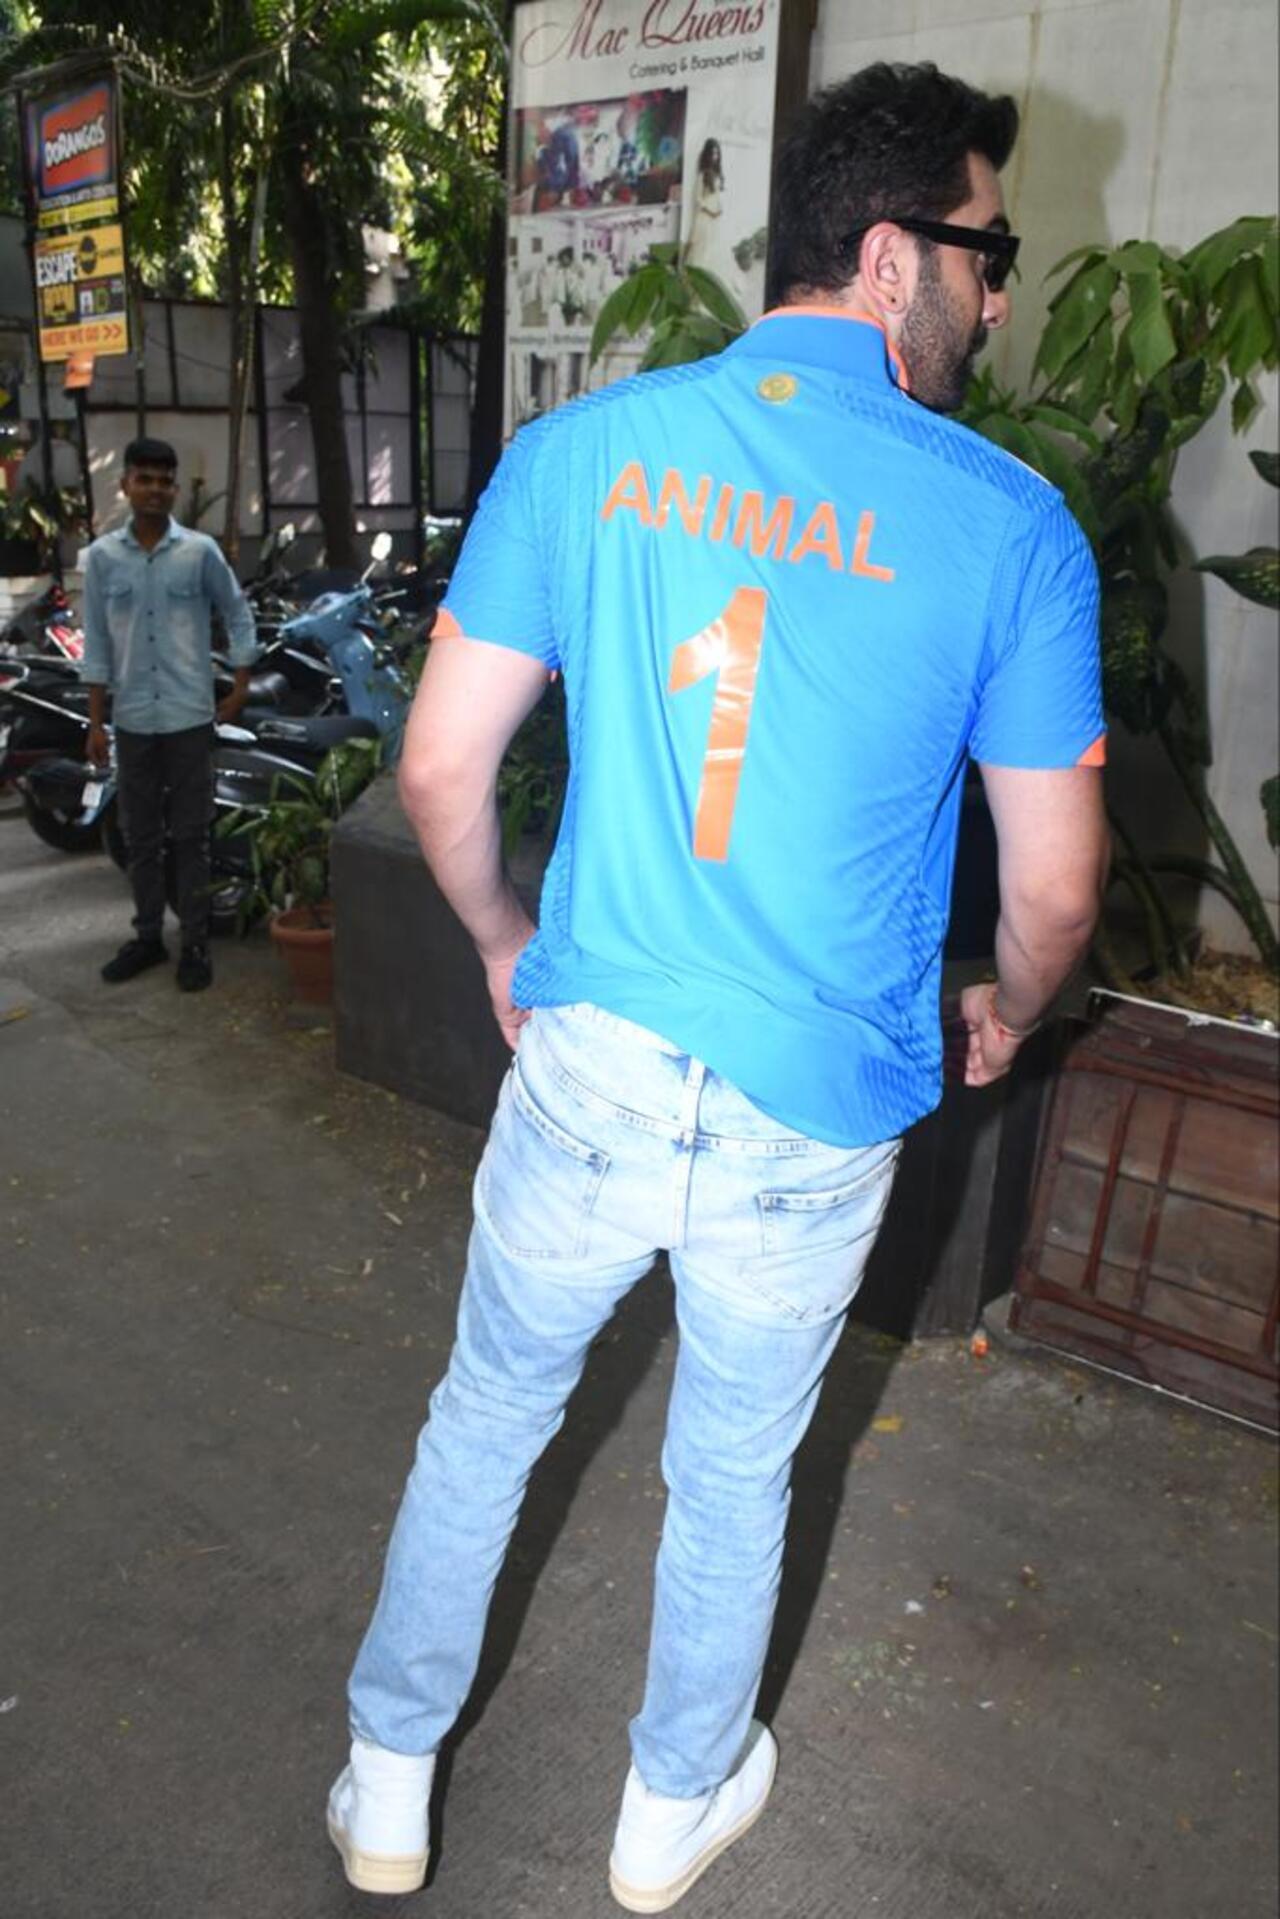 The cricket jersey had Animal written on the back along with the number 1, indicating the film's release date